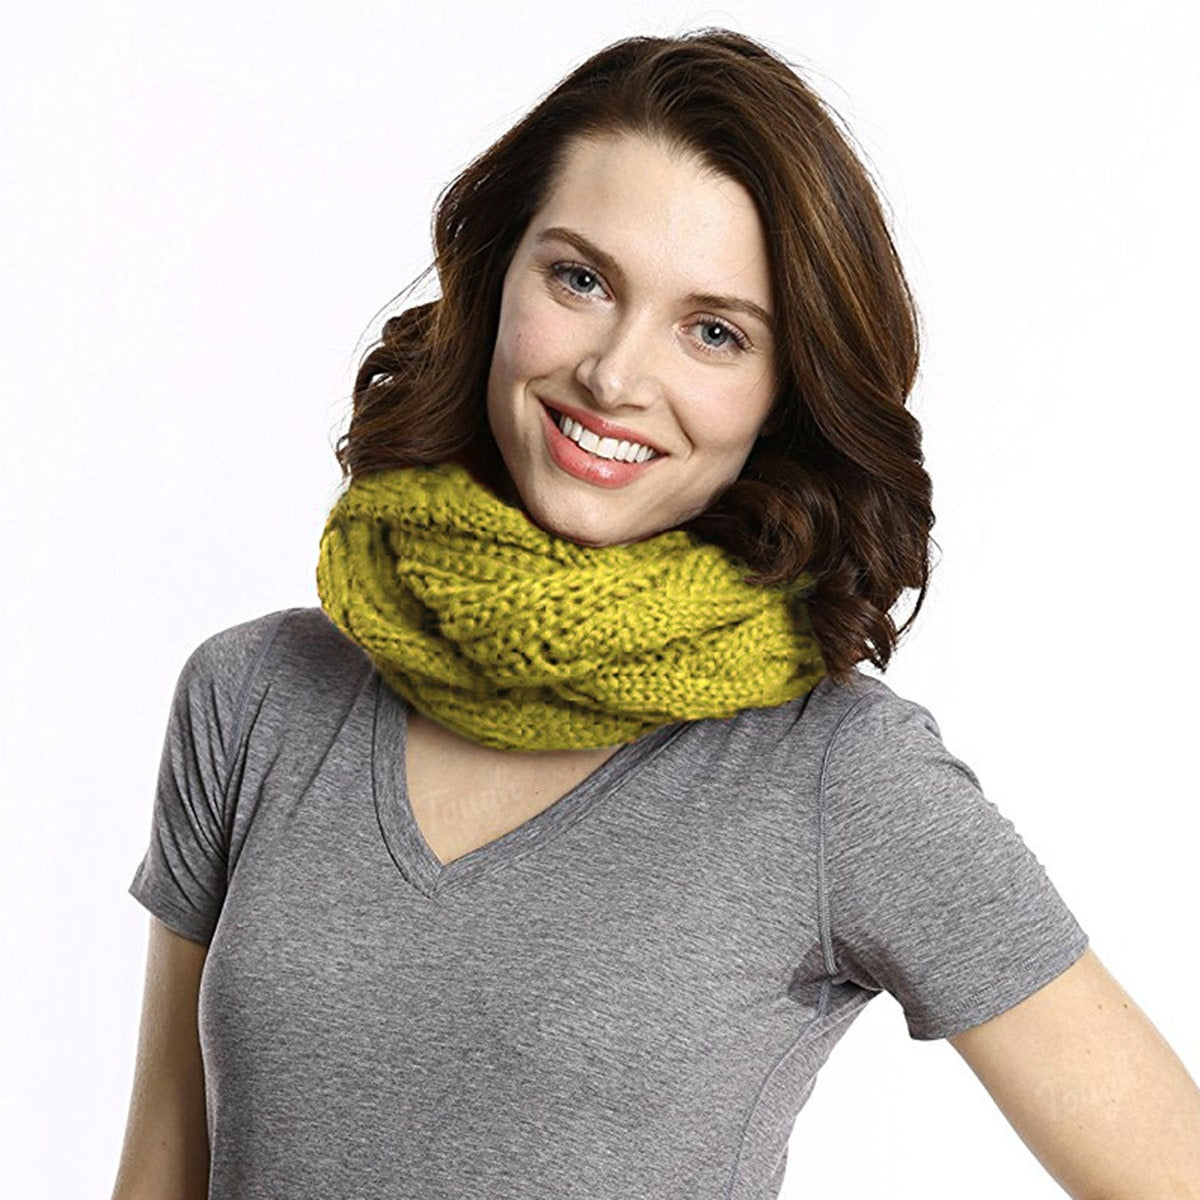 Women's Cable Knit Infinity Scarf By Tickled Pink – Soft, Versatile